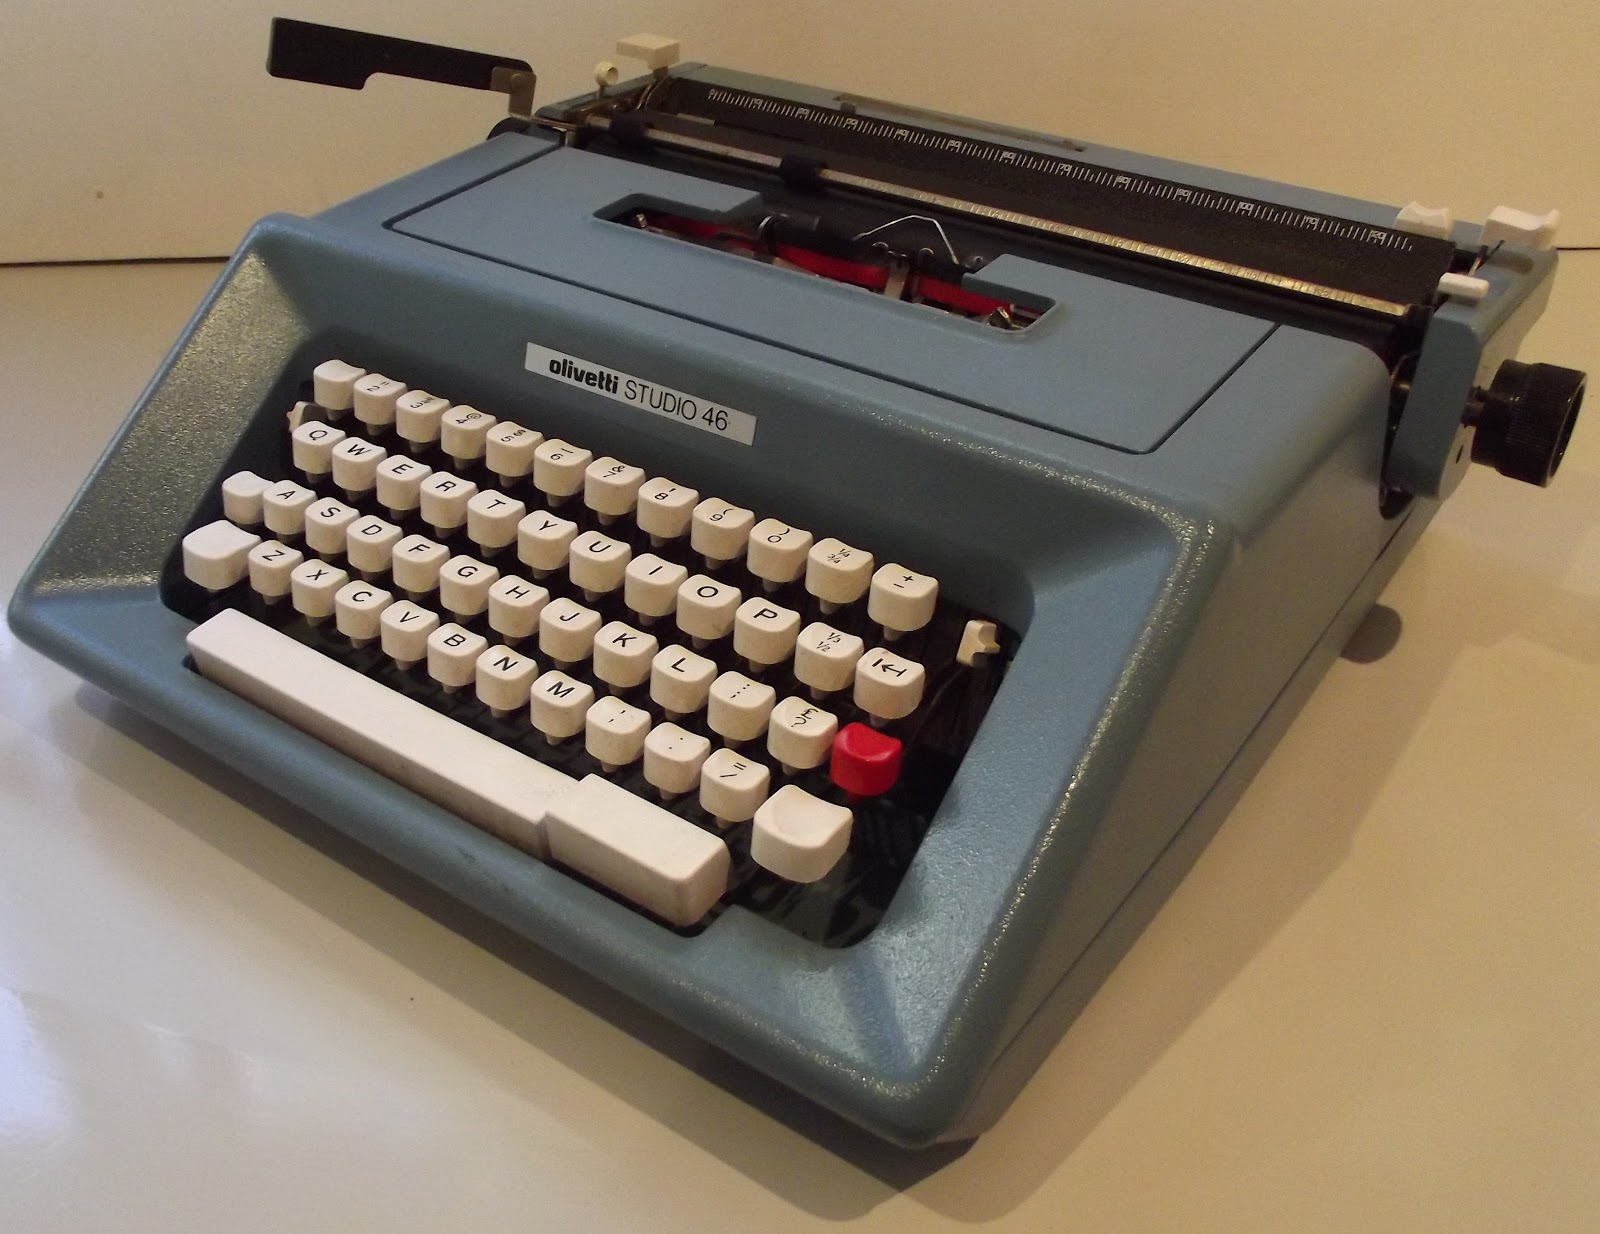 oz.Typewriter: The Art of Sottsass and Bellini: Top 10 Olivetti